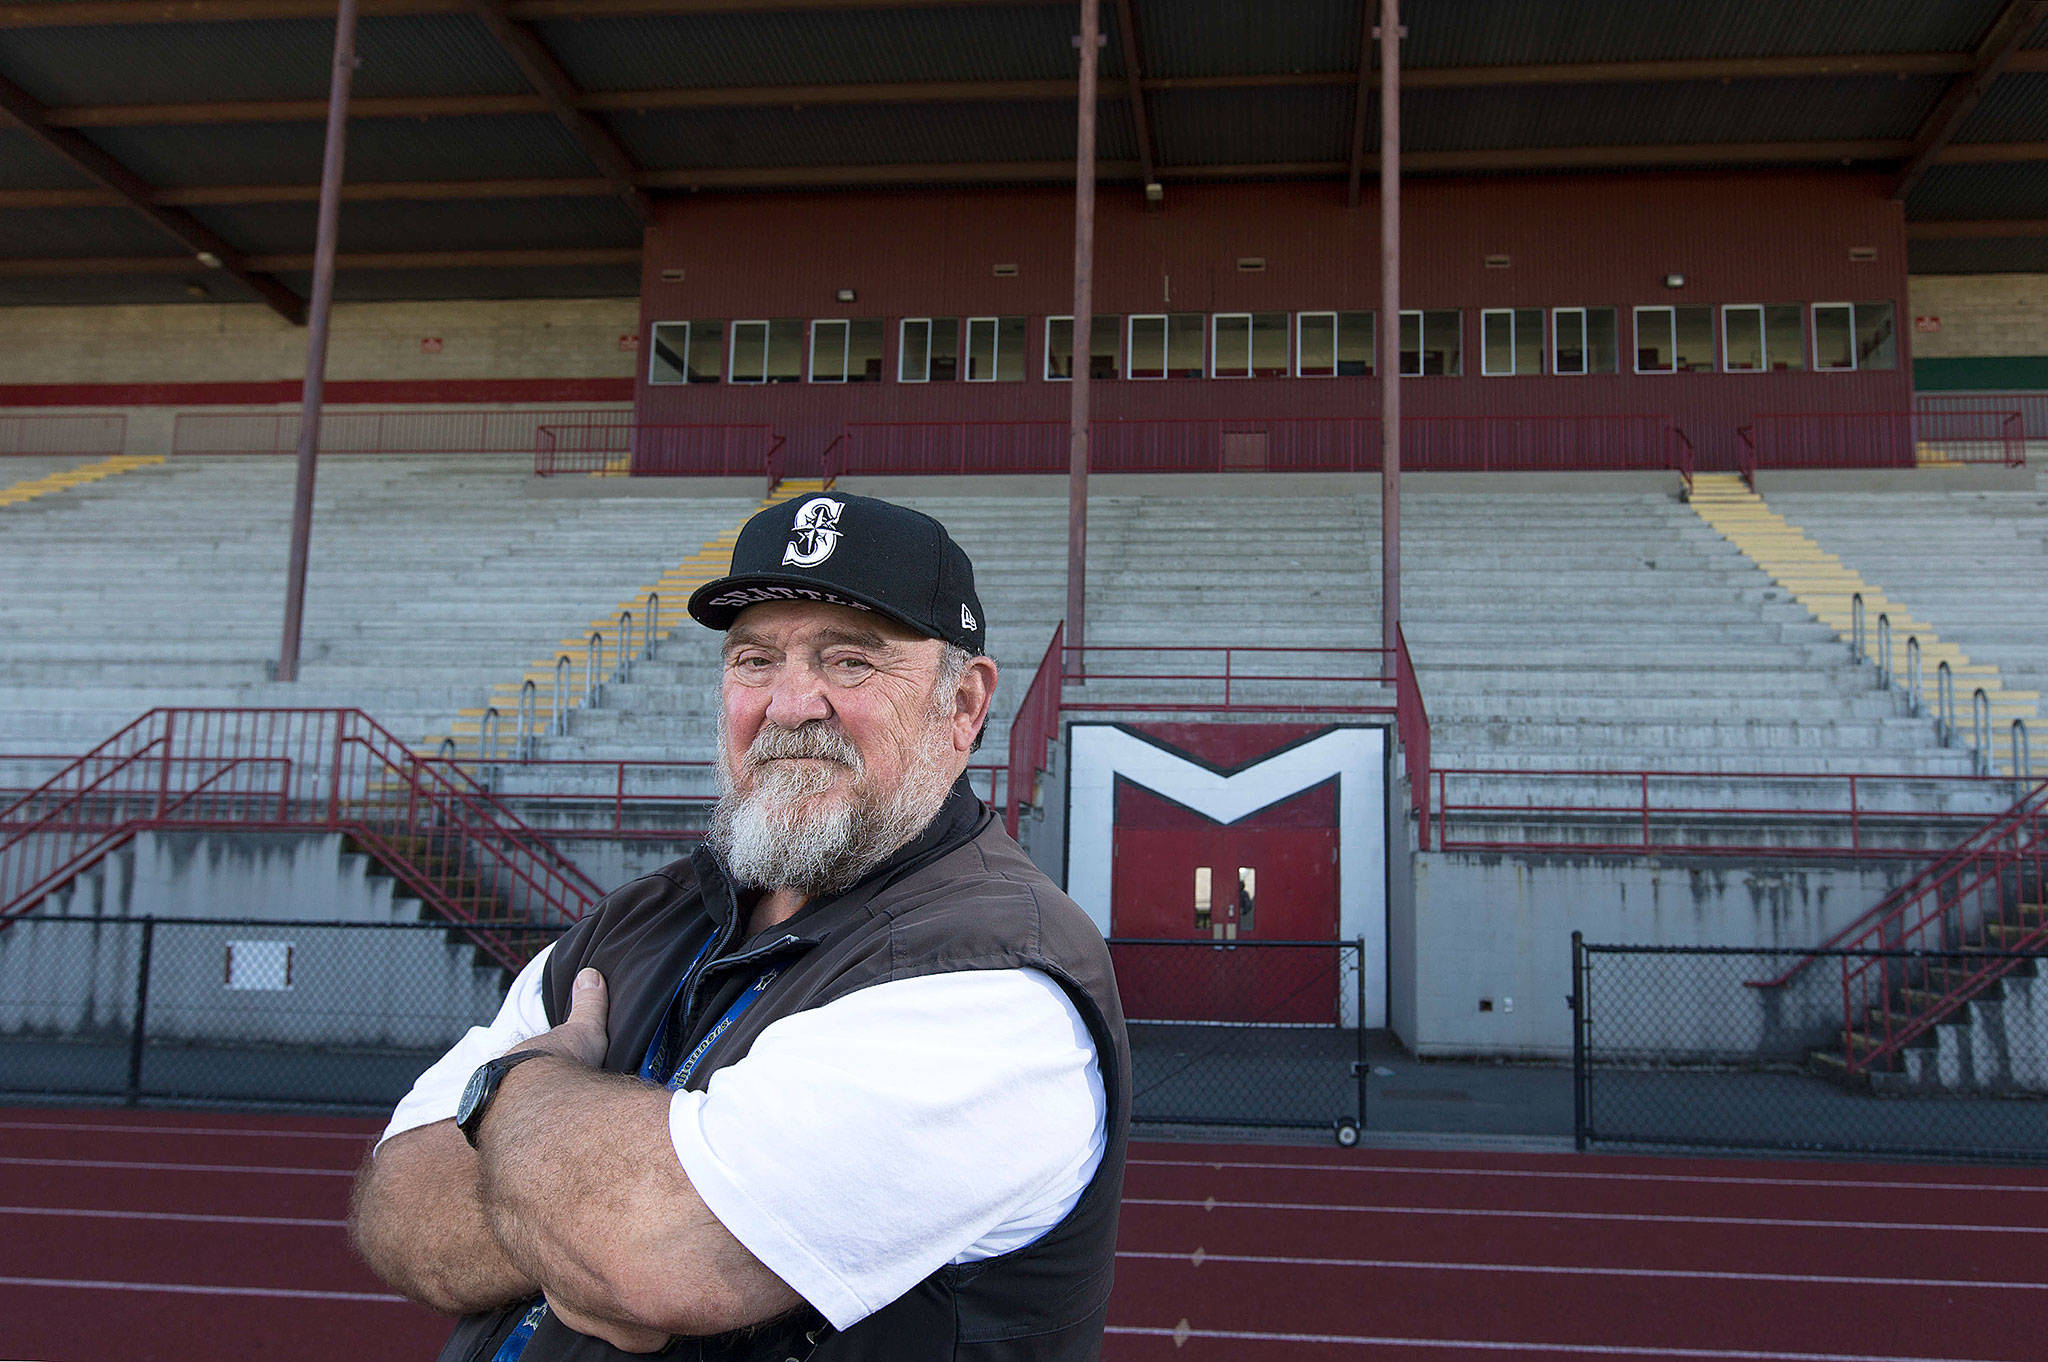 Longtime Marysville School District teacher and coach Mike VanDaveer, who also announced Marysville Pilchuck football games, poses at Quil Ceda Stadium on June 23 in Marysville. VanDaveer is retiring after more than three decades serving the Marysville community. (Andy Bronson / The Herald)